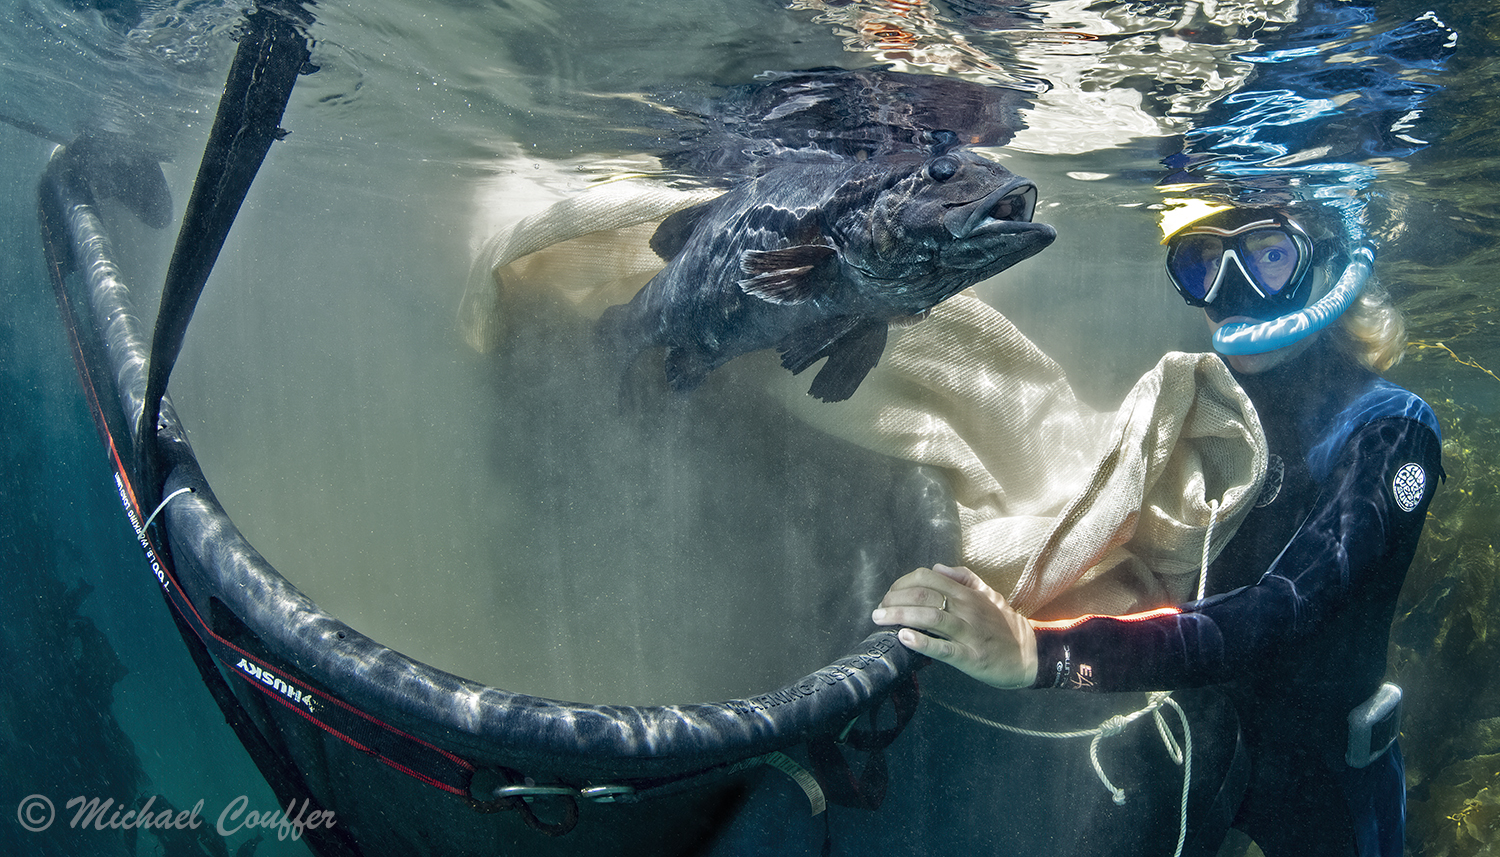 a diver wearing a snorkeling mask releases a giant sea bass from a large tank into open water